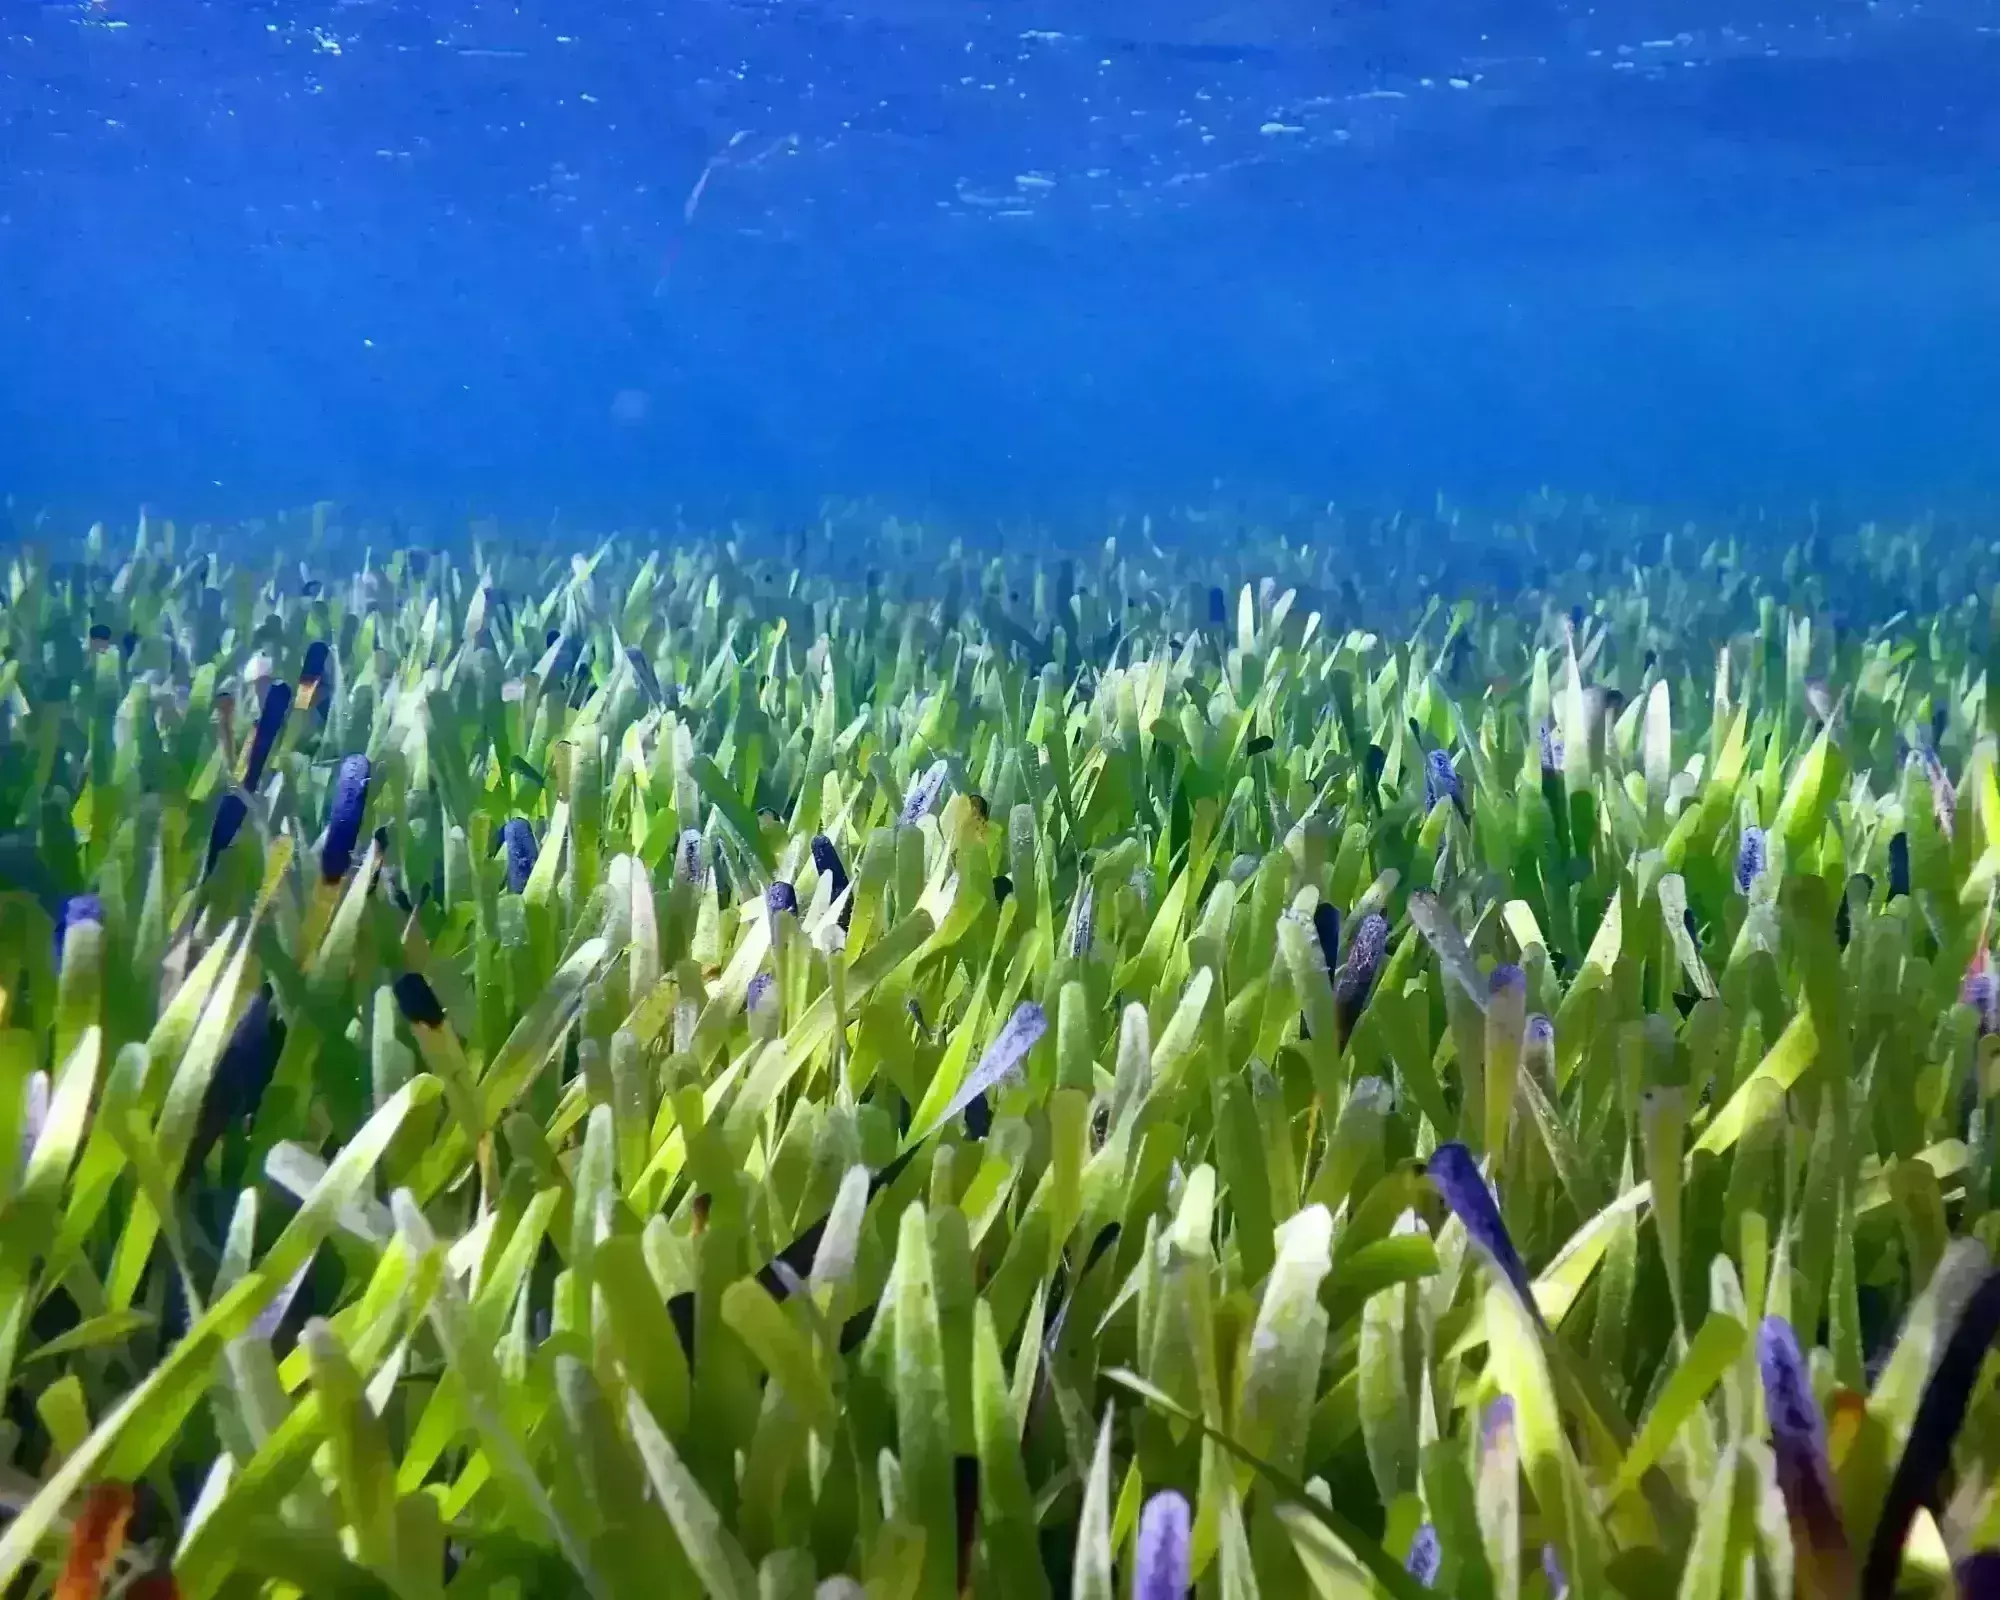 Scientists discover an Australian seagrass clone as worlds largest plant